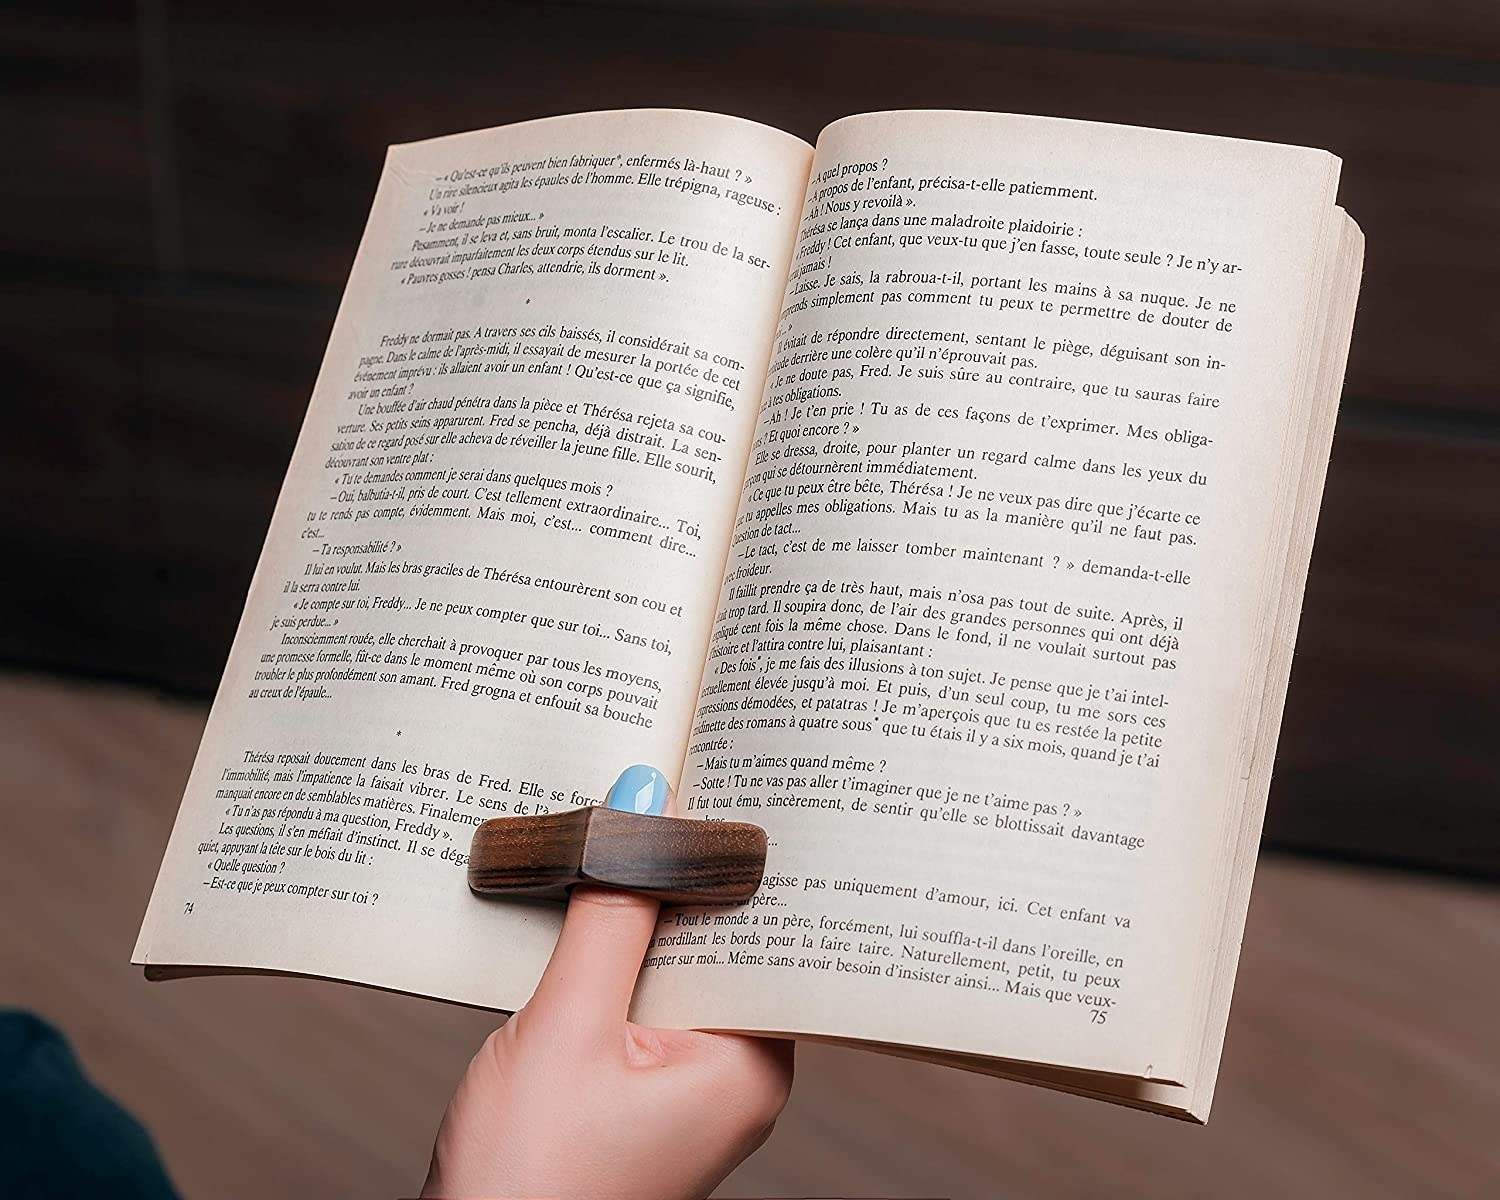 A person using the book page holder